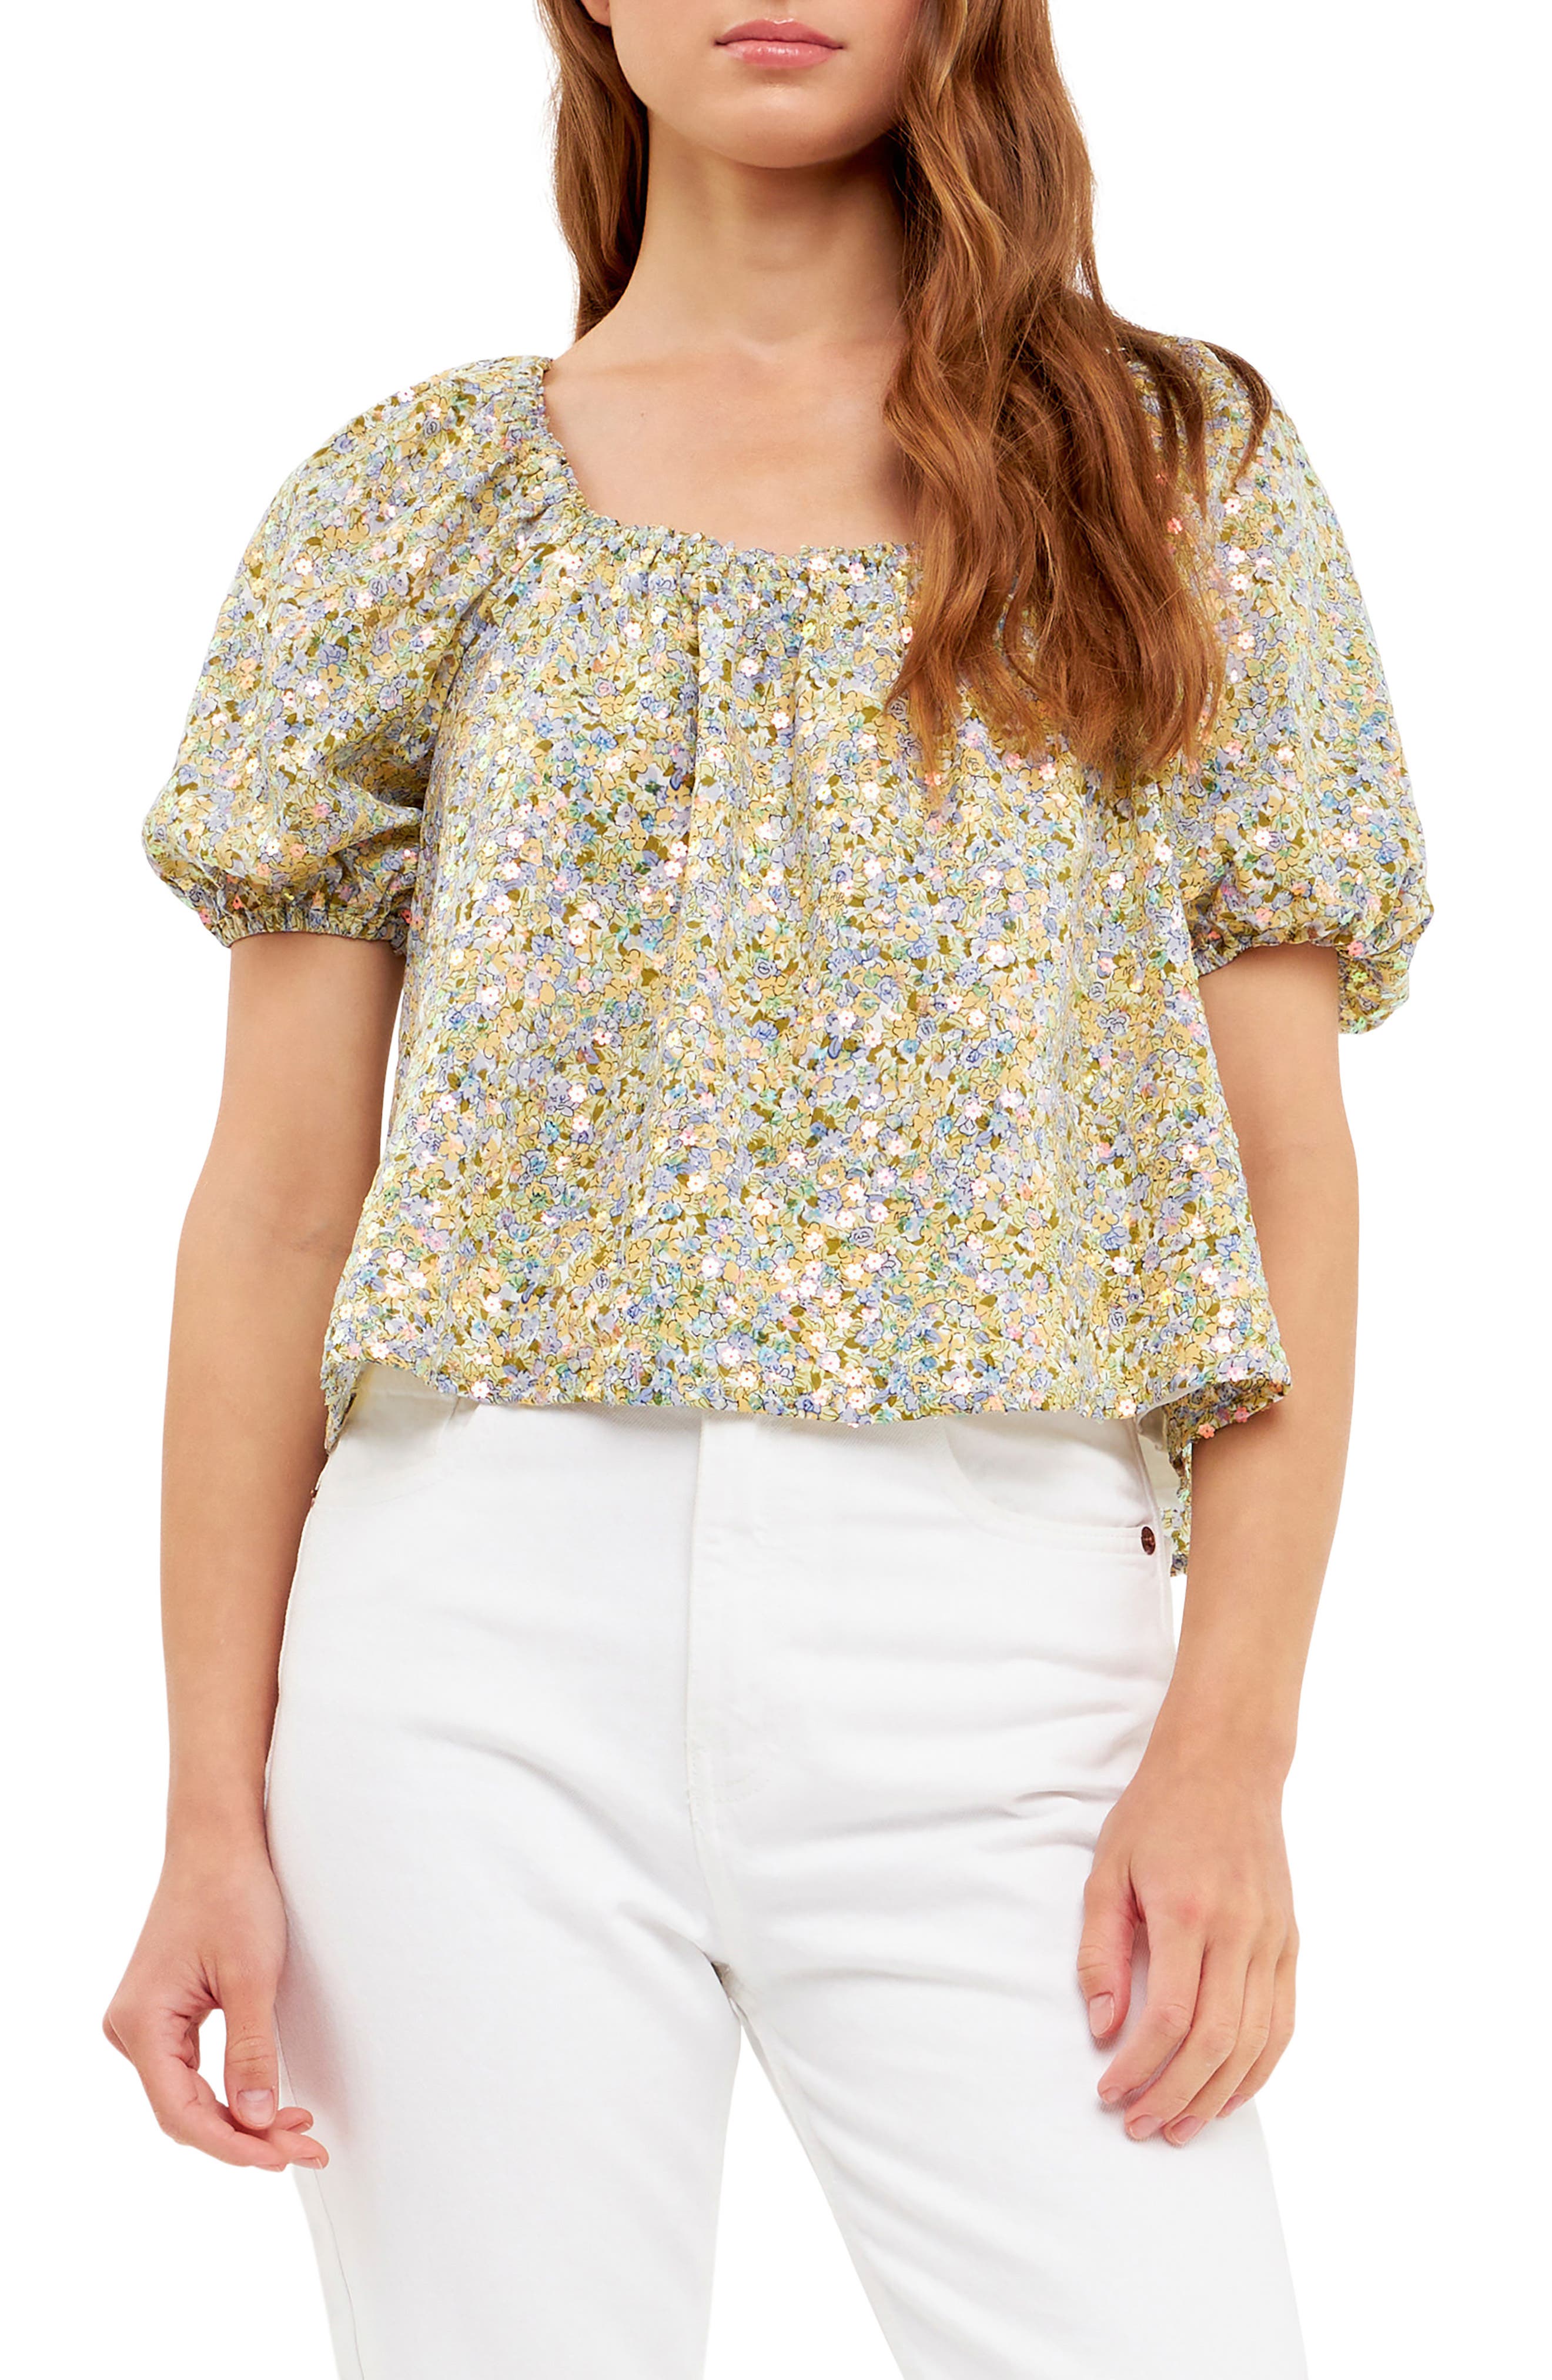 Botrong Womens Round Collar Printed Sequins Short Sleeve Tops 